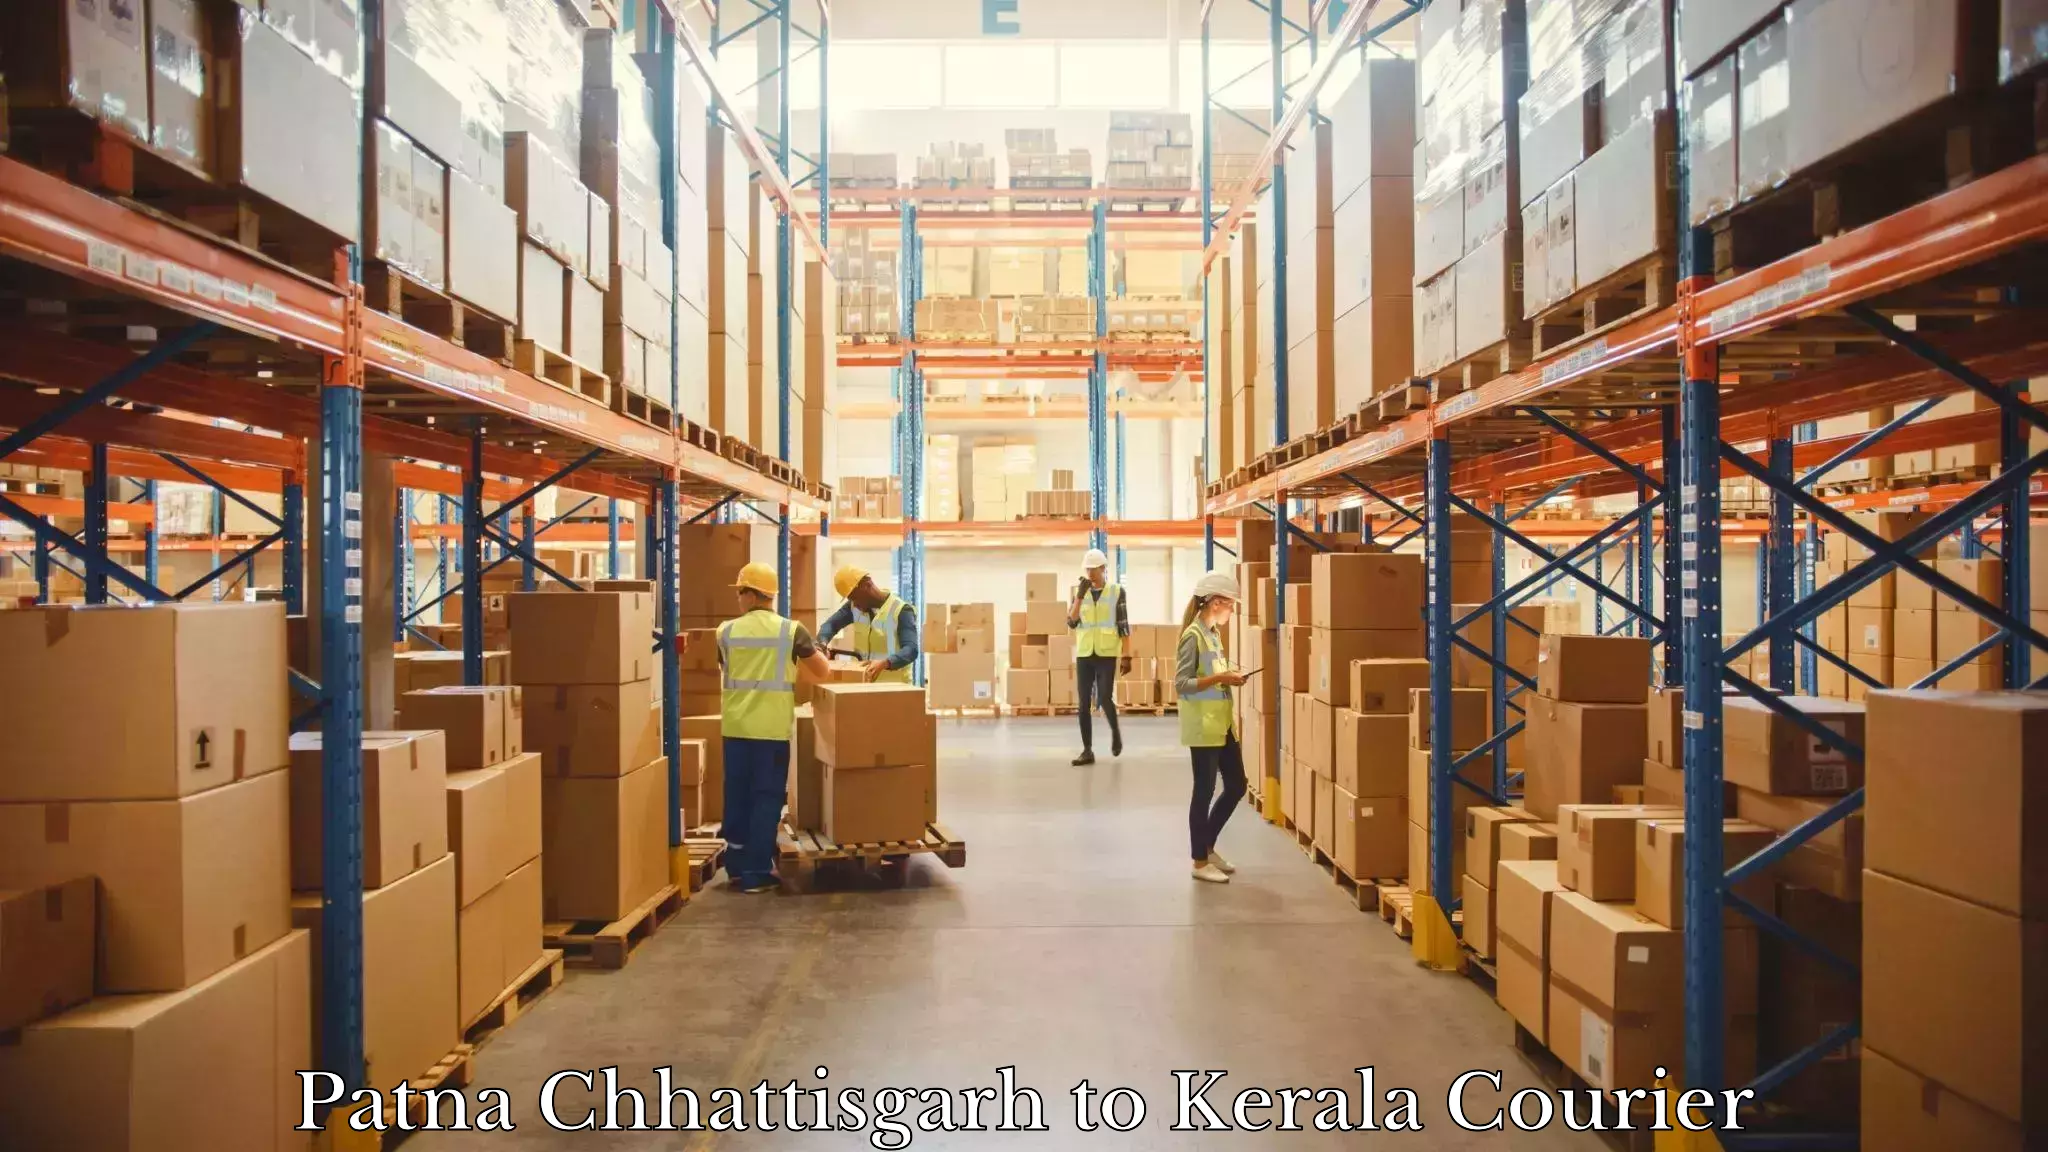 Optimized shipping services Patna Chhattisgarh to Cochin University of Science and Technology